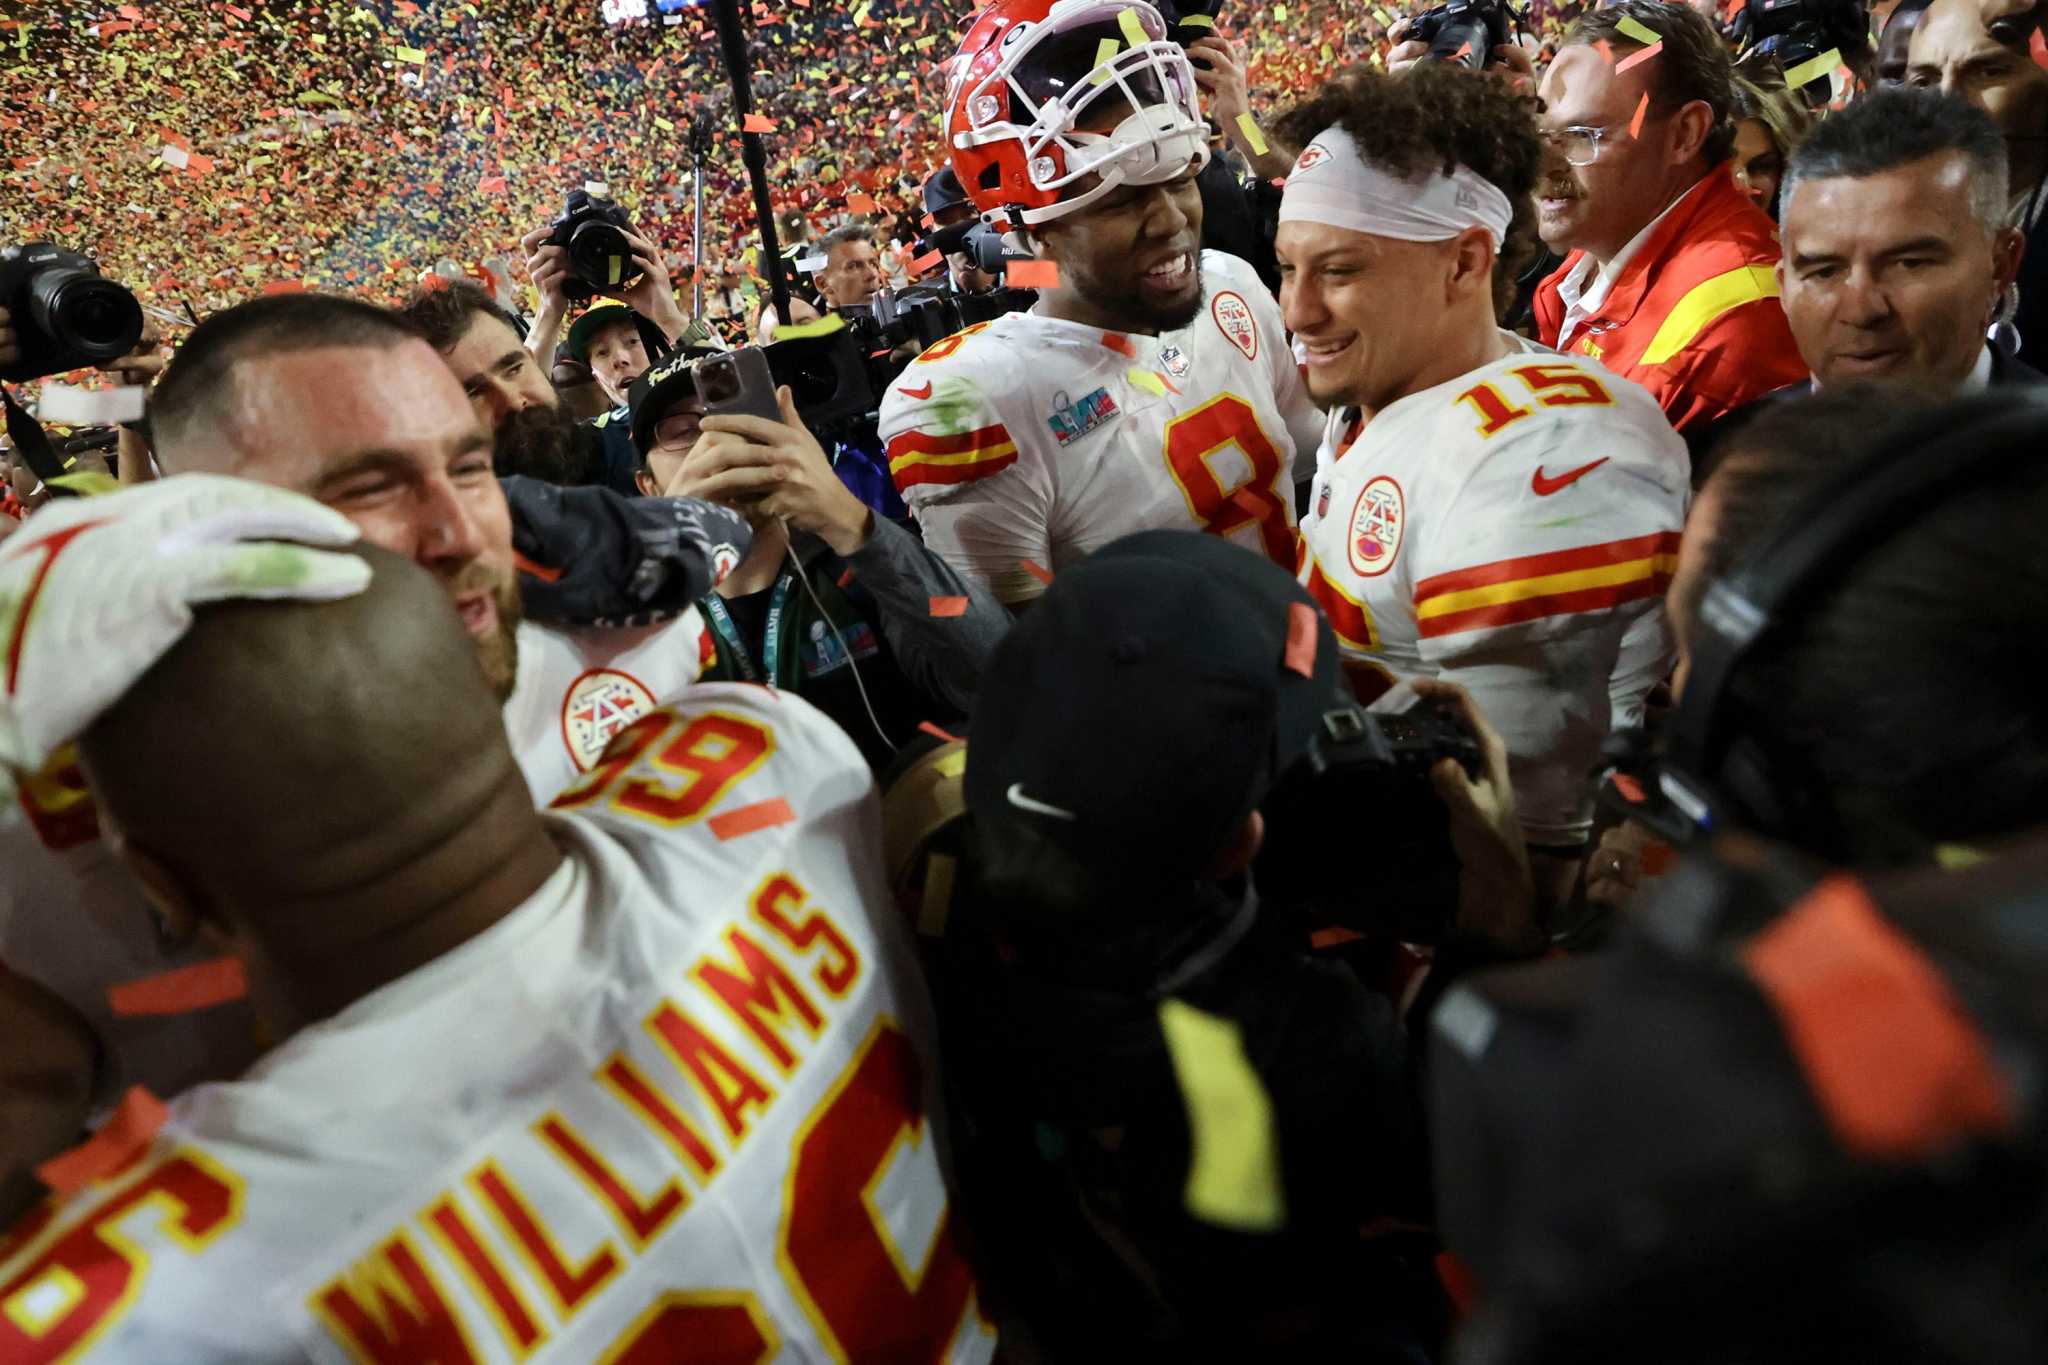 Super Bowl LVII: Chiefs beat Eagles in thriller as Patrick Mahomes